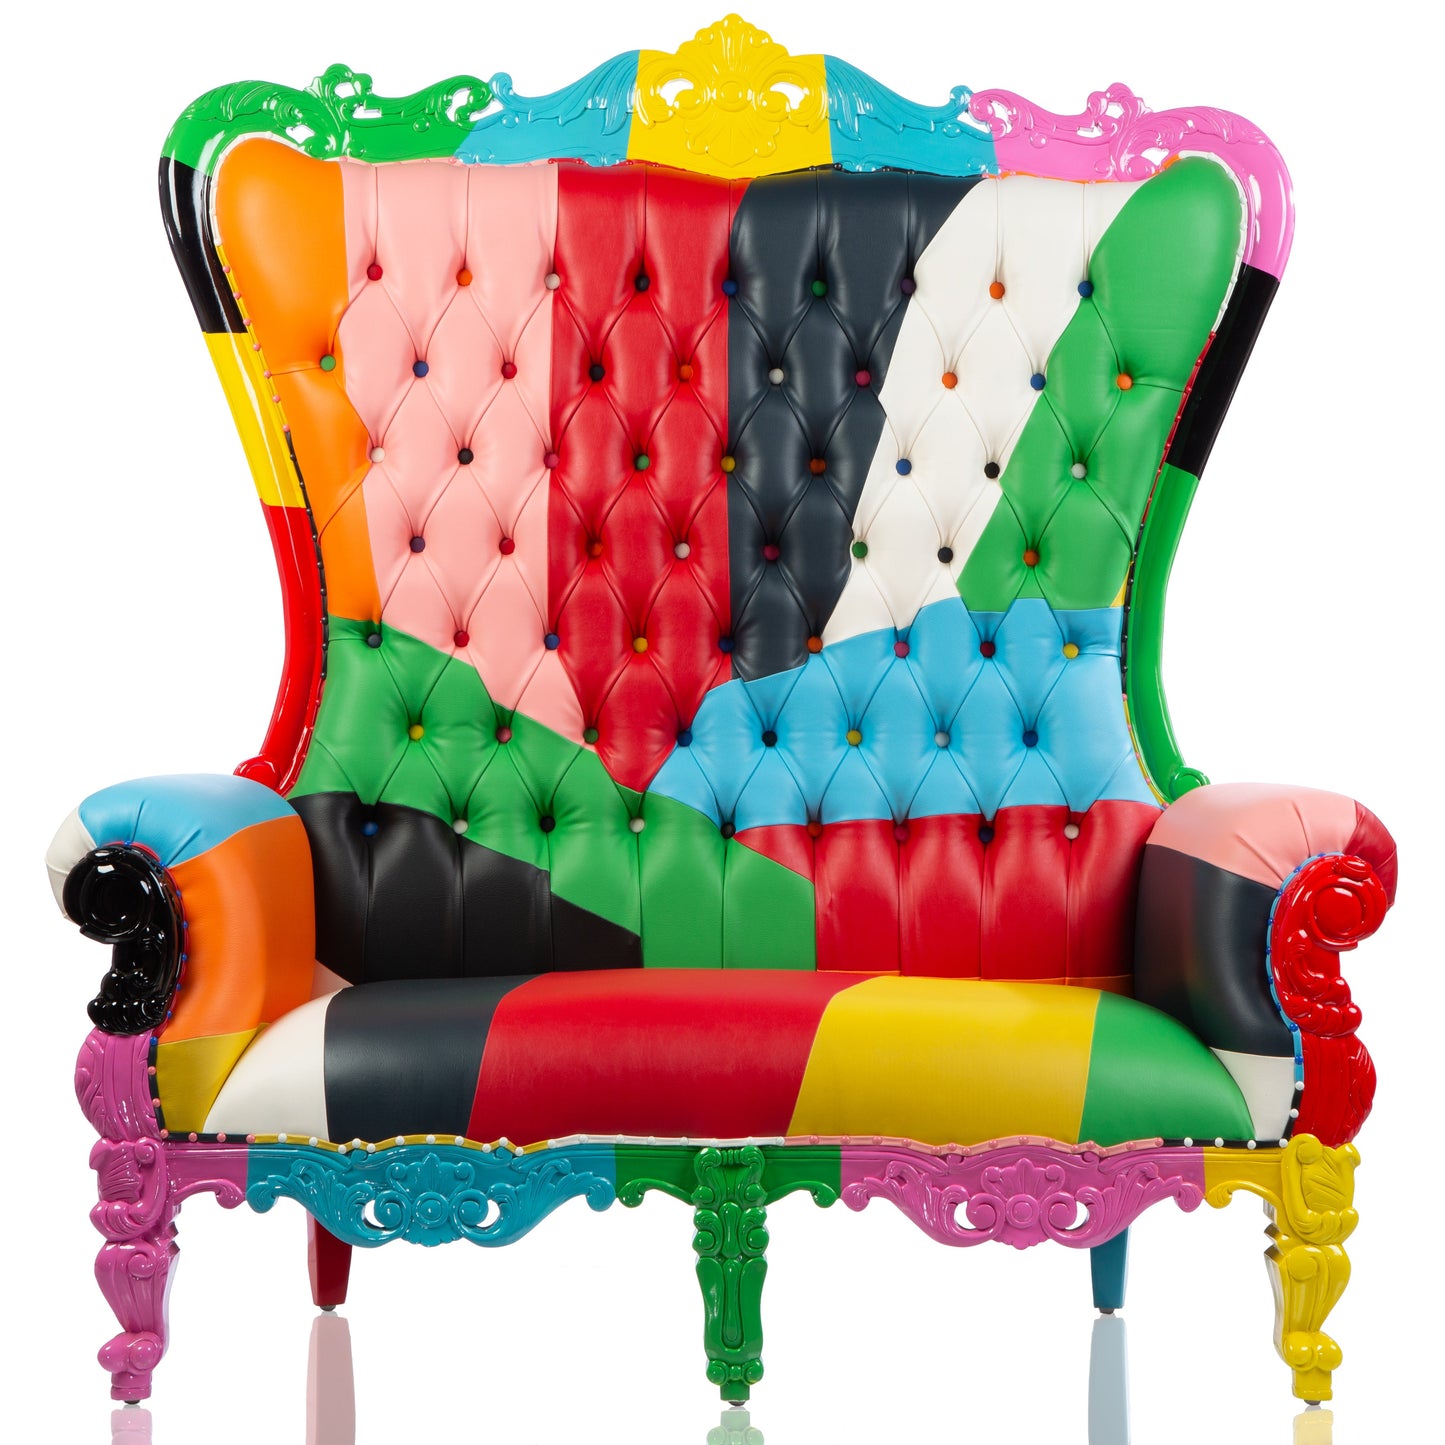 The Balvin Double Throne Multicolored (West Coast)